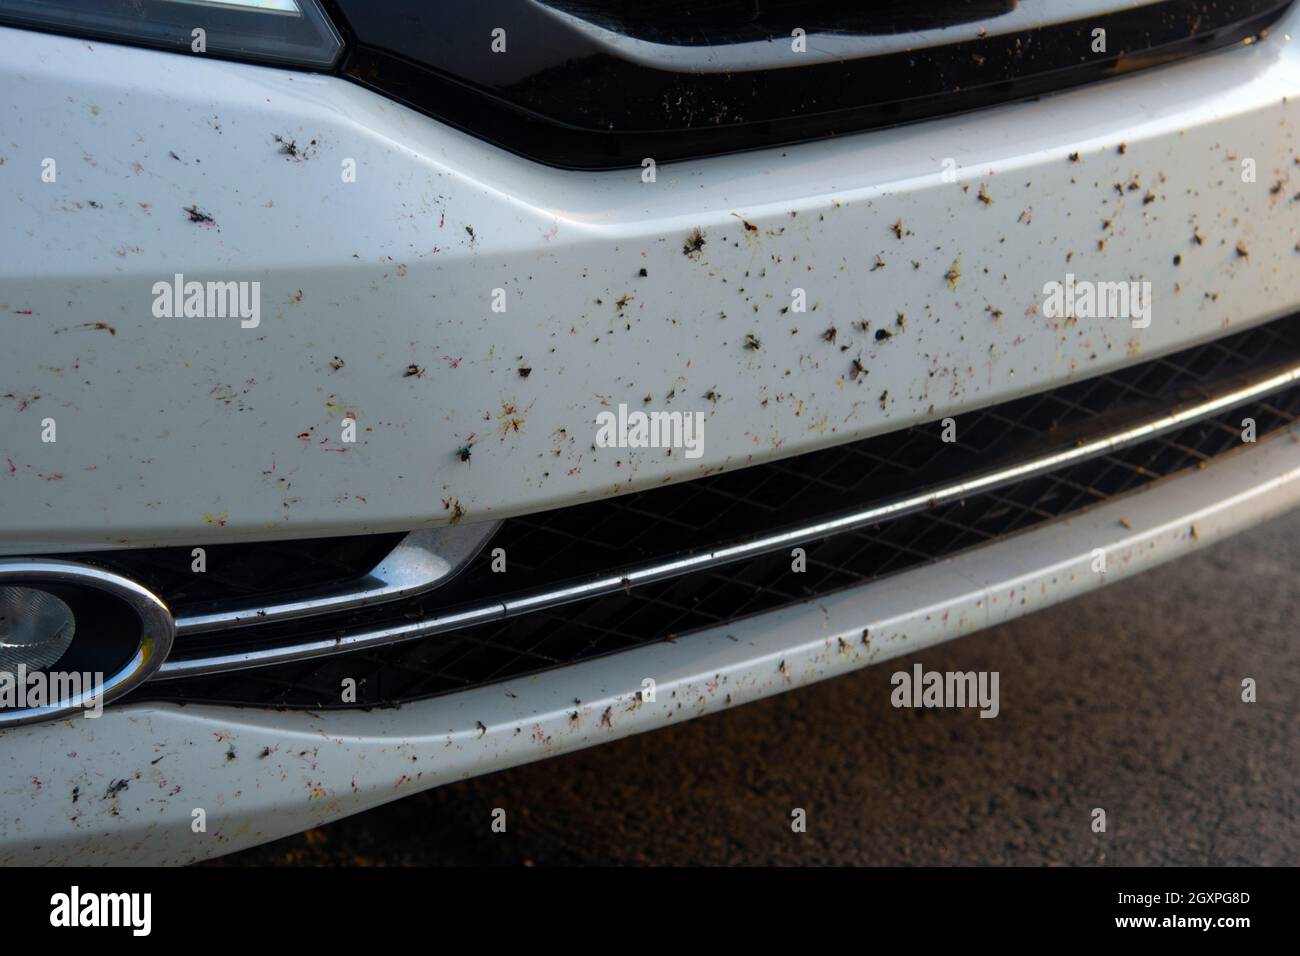 Various bugs and insects stuck on a bumper of a white car after driving through the wilderness, Alaska Stock Photo